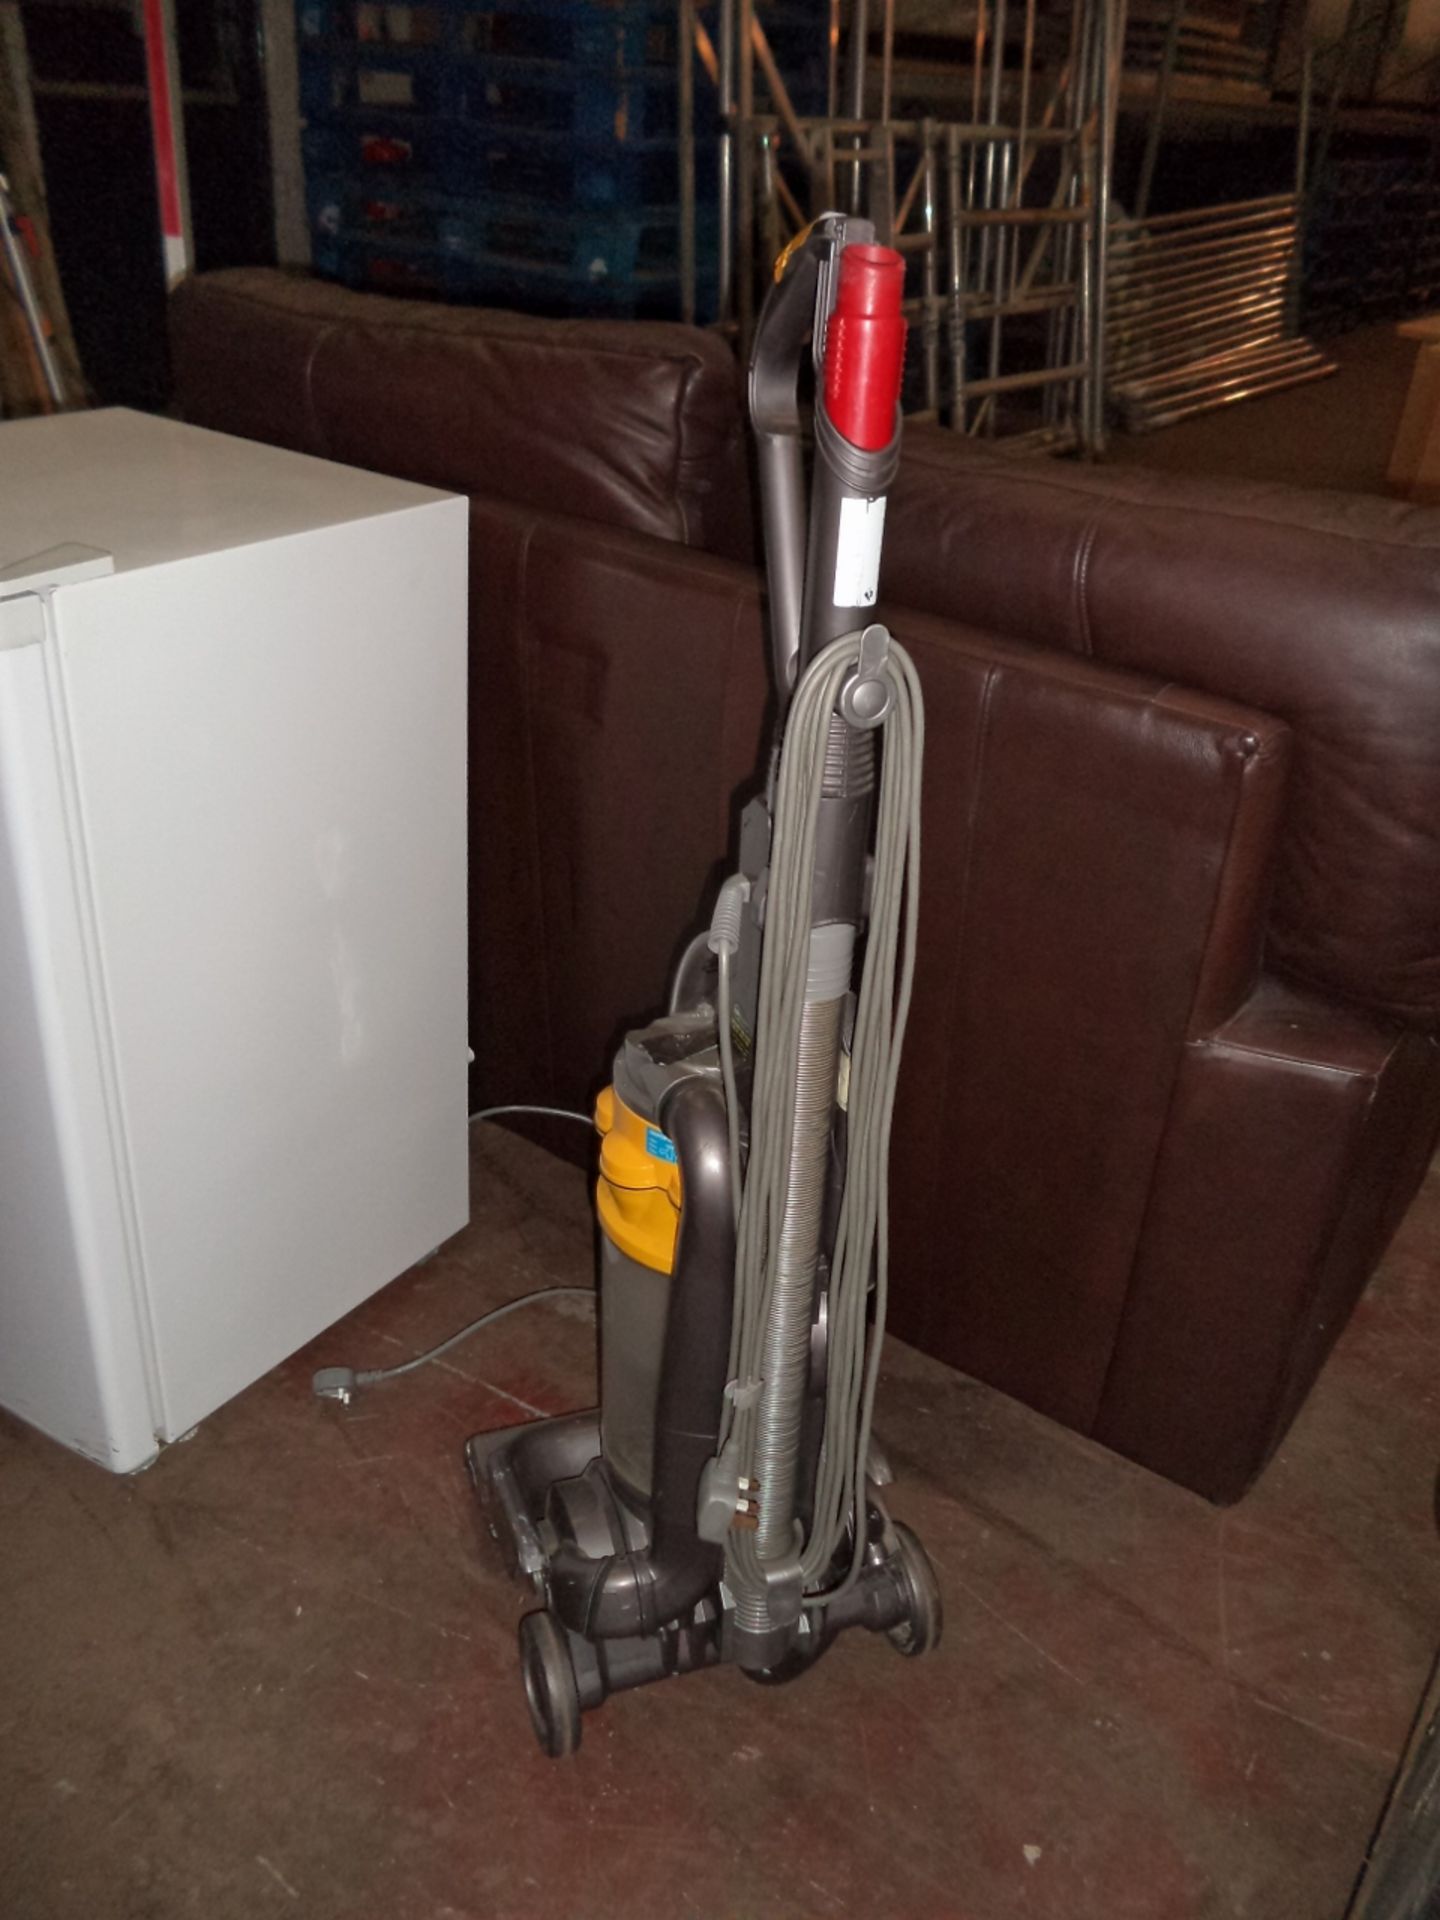 Dyson DC14 bagless vacuum cleaner - Image 2 of 2